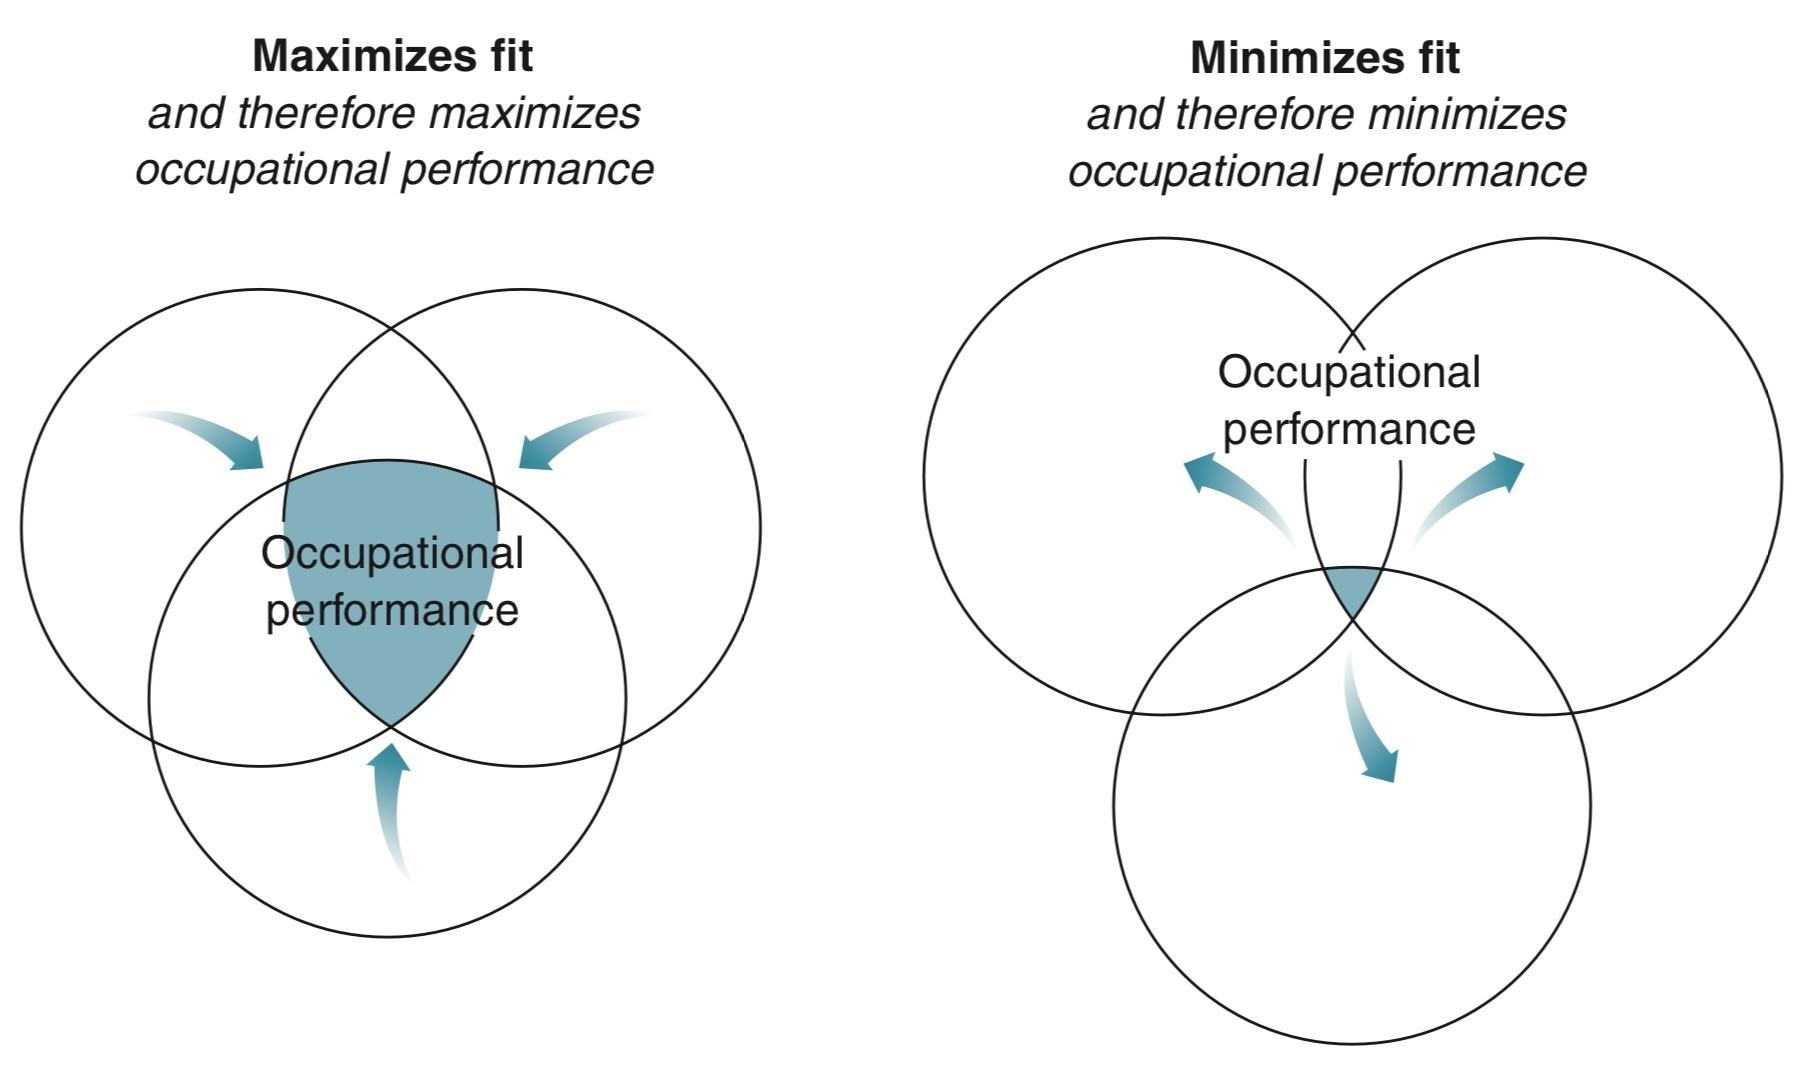 Applying the Canadian Model of Occupational Performance